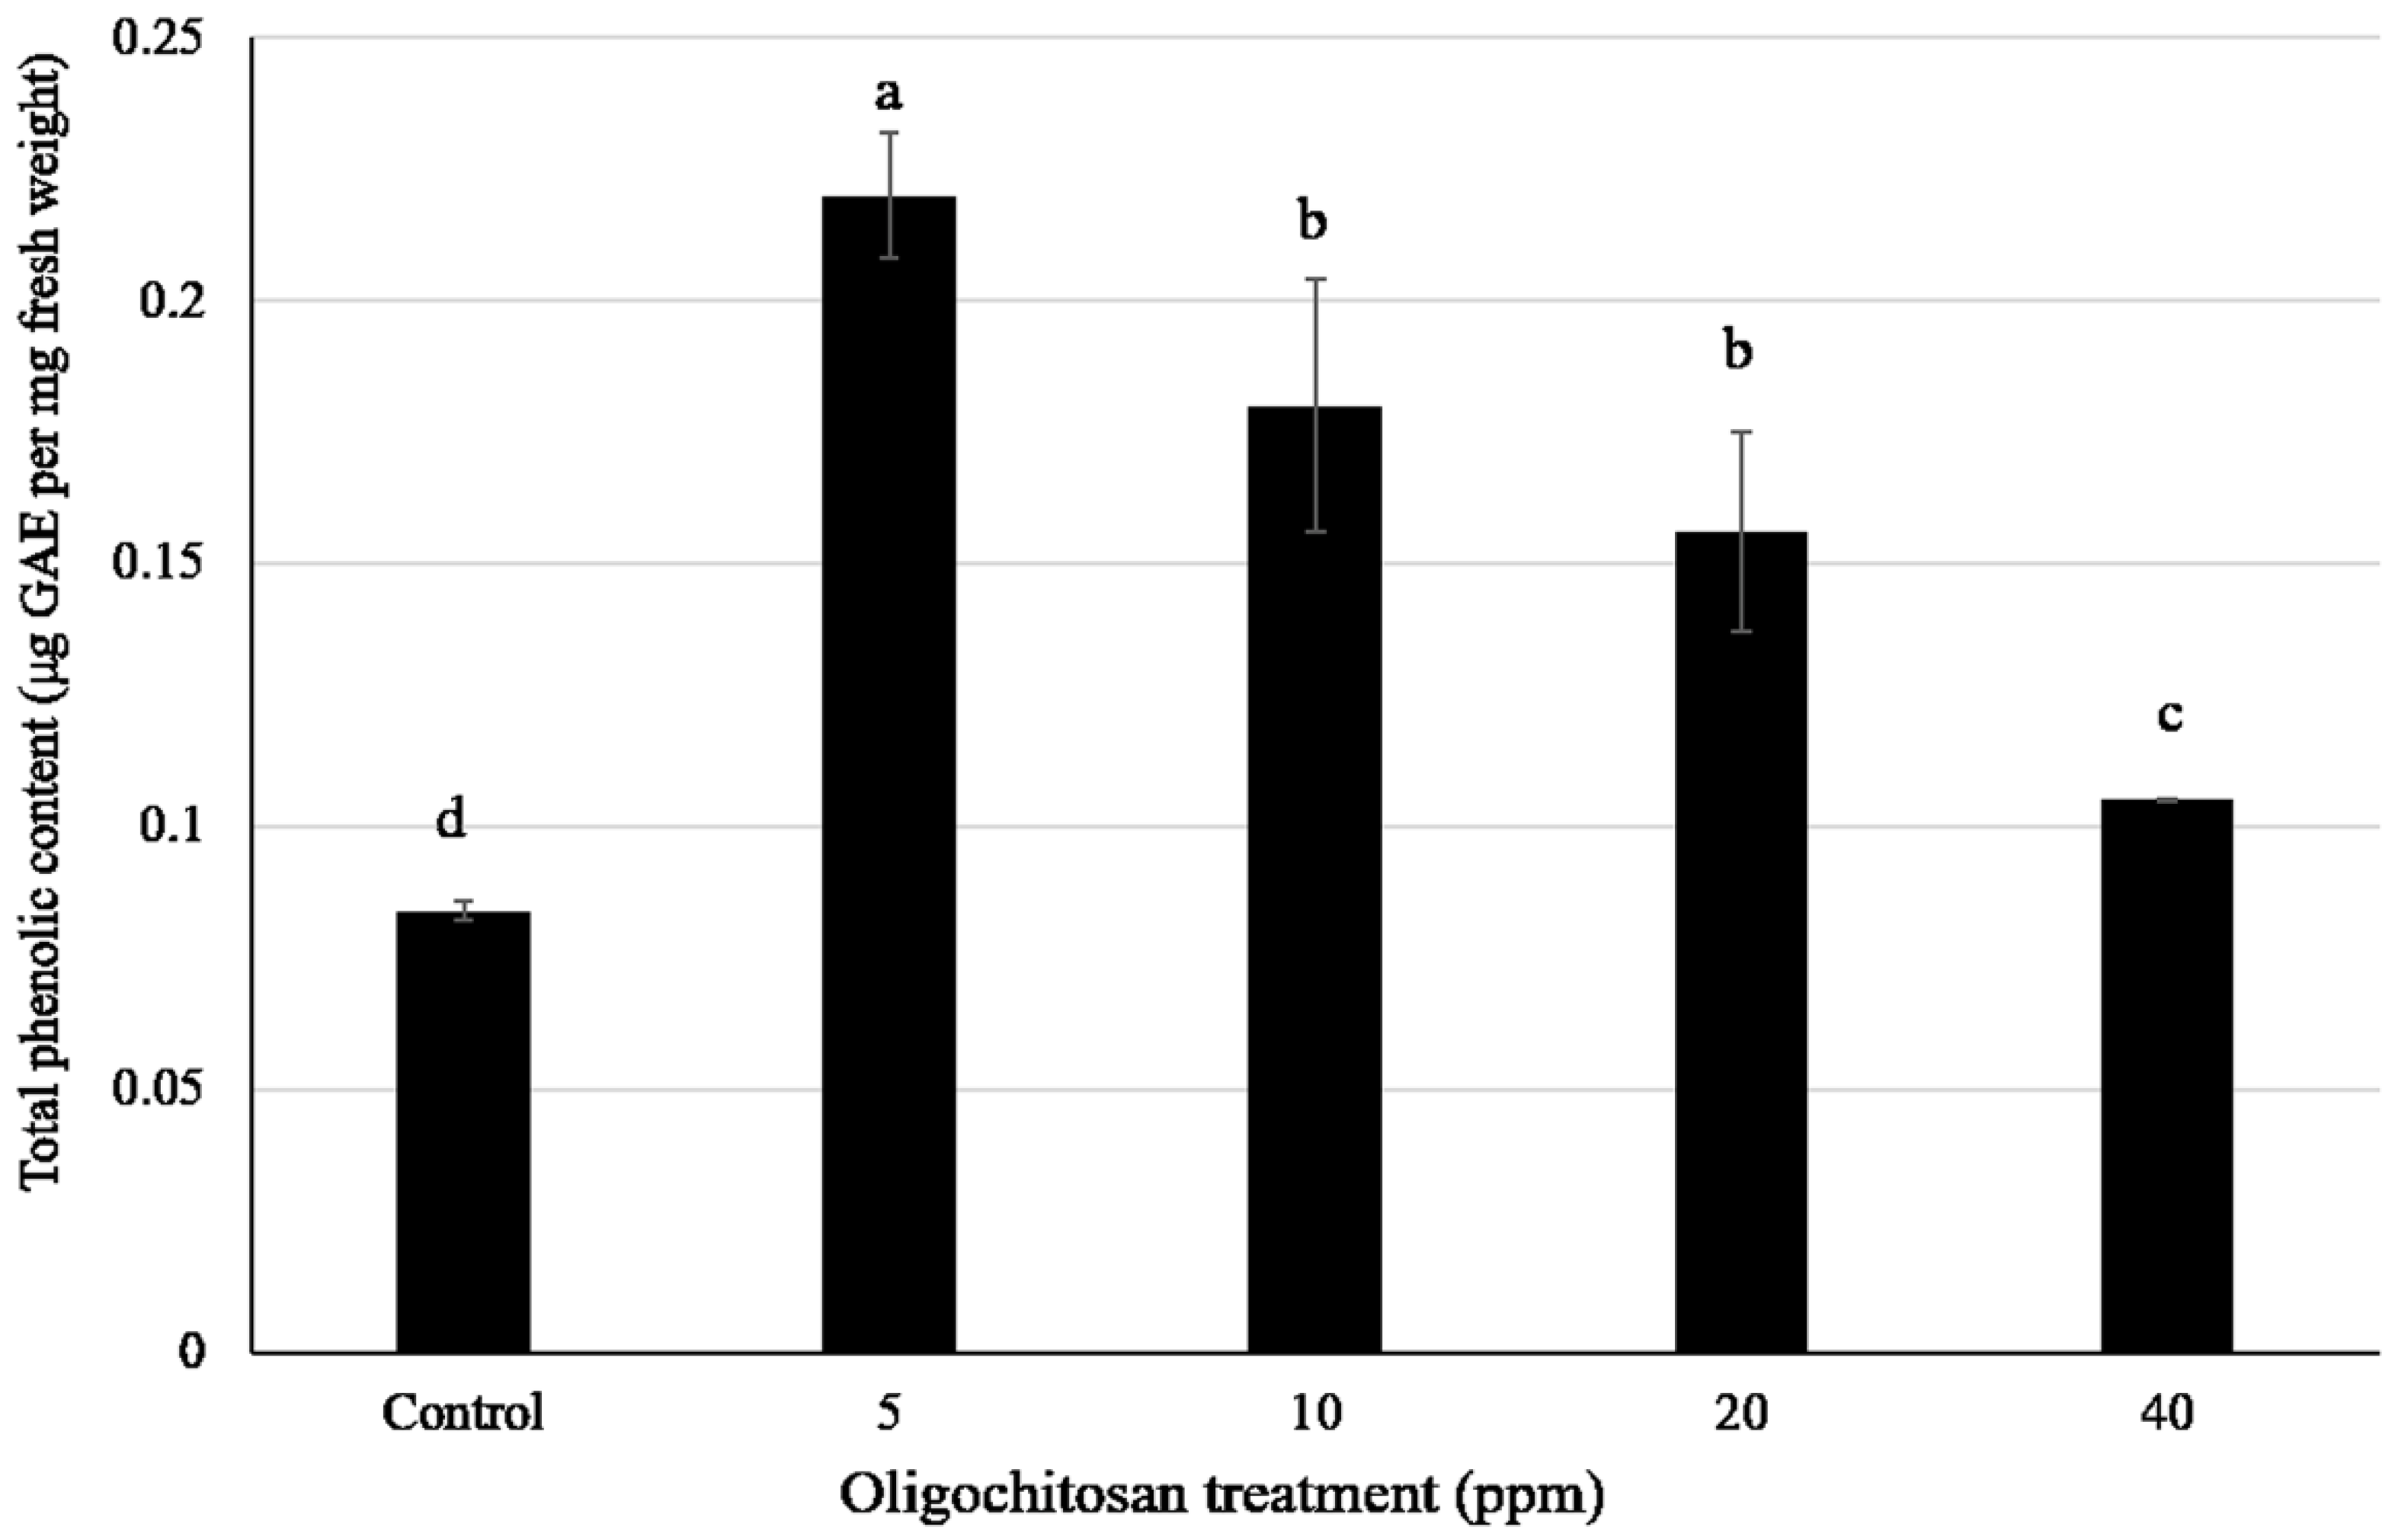 Agronomy Free Full Text Metabolic Changes And Increased Levels Of Bioactive Compounds In White Radish Raphanus Sativus L Cv 01 Sprouts Elicited By Oligochitosan Html